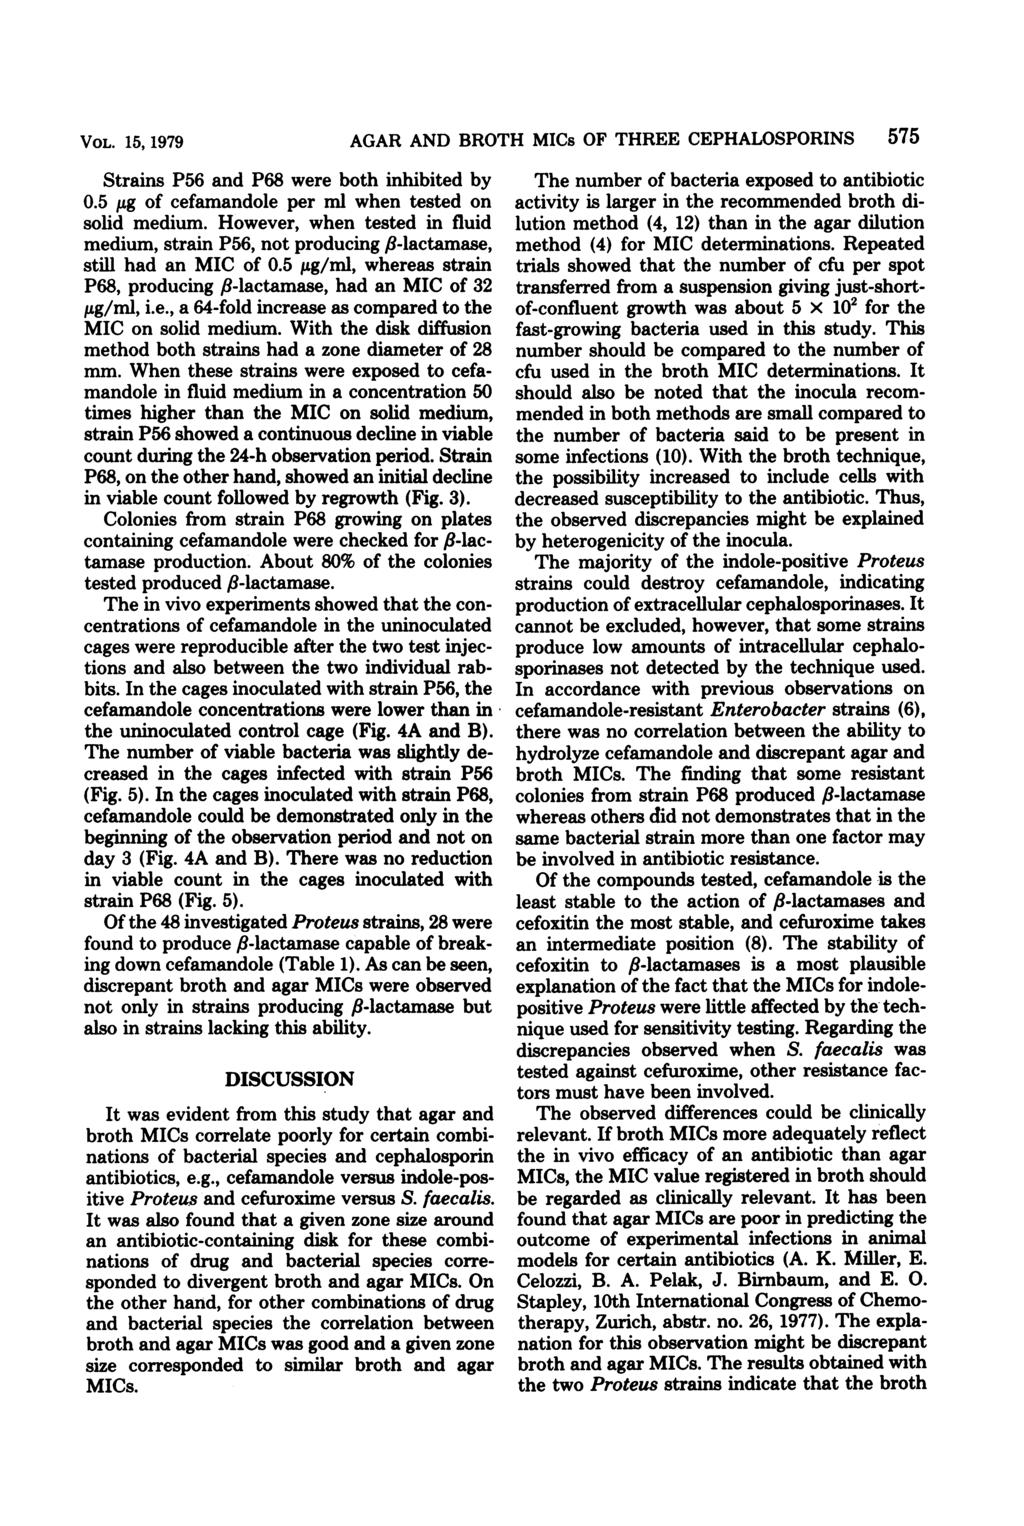 VOL 15, 1979 Strains P56 and P68 were both inhibited by 05 jig of cefamandole per ml when tested on solid medium However, when tested in fluid medium, strain P56, not producing,b-lactamase, still had